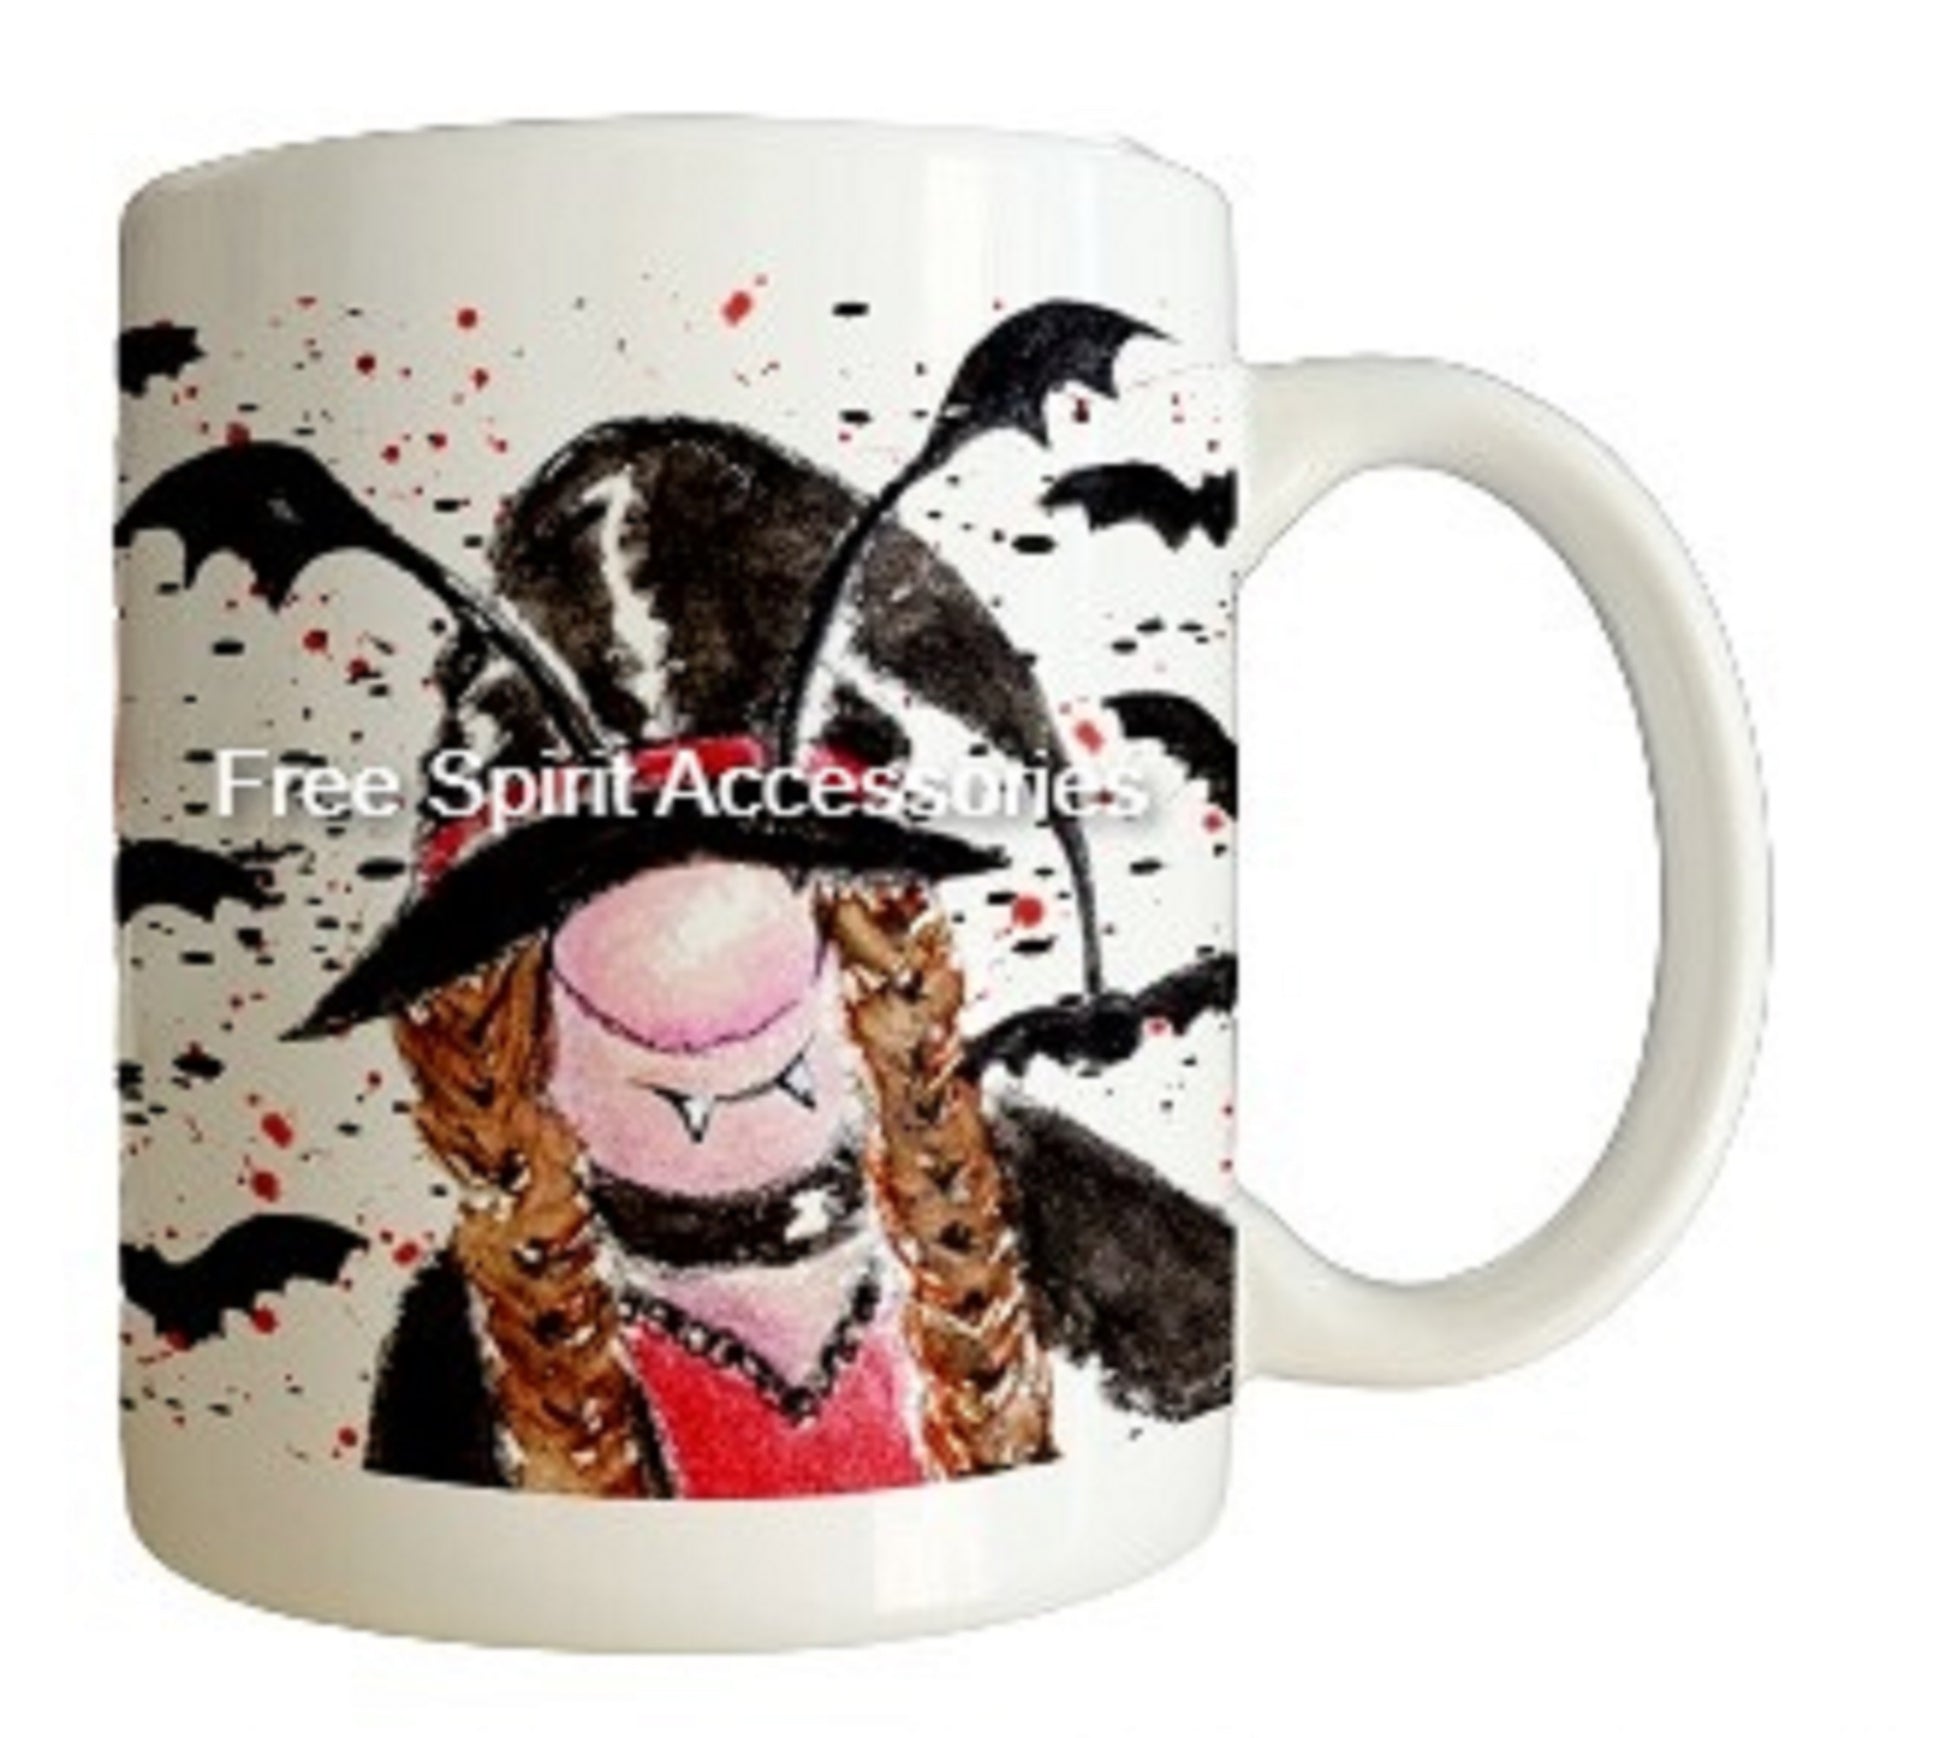  Vampire Gonk With Bats Background Mug by Free Spirit Accessories sold by Free Spirit Accessories